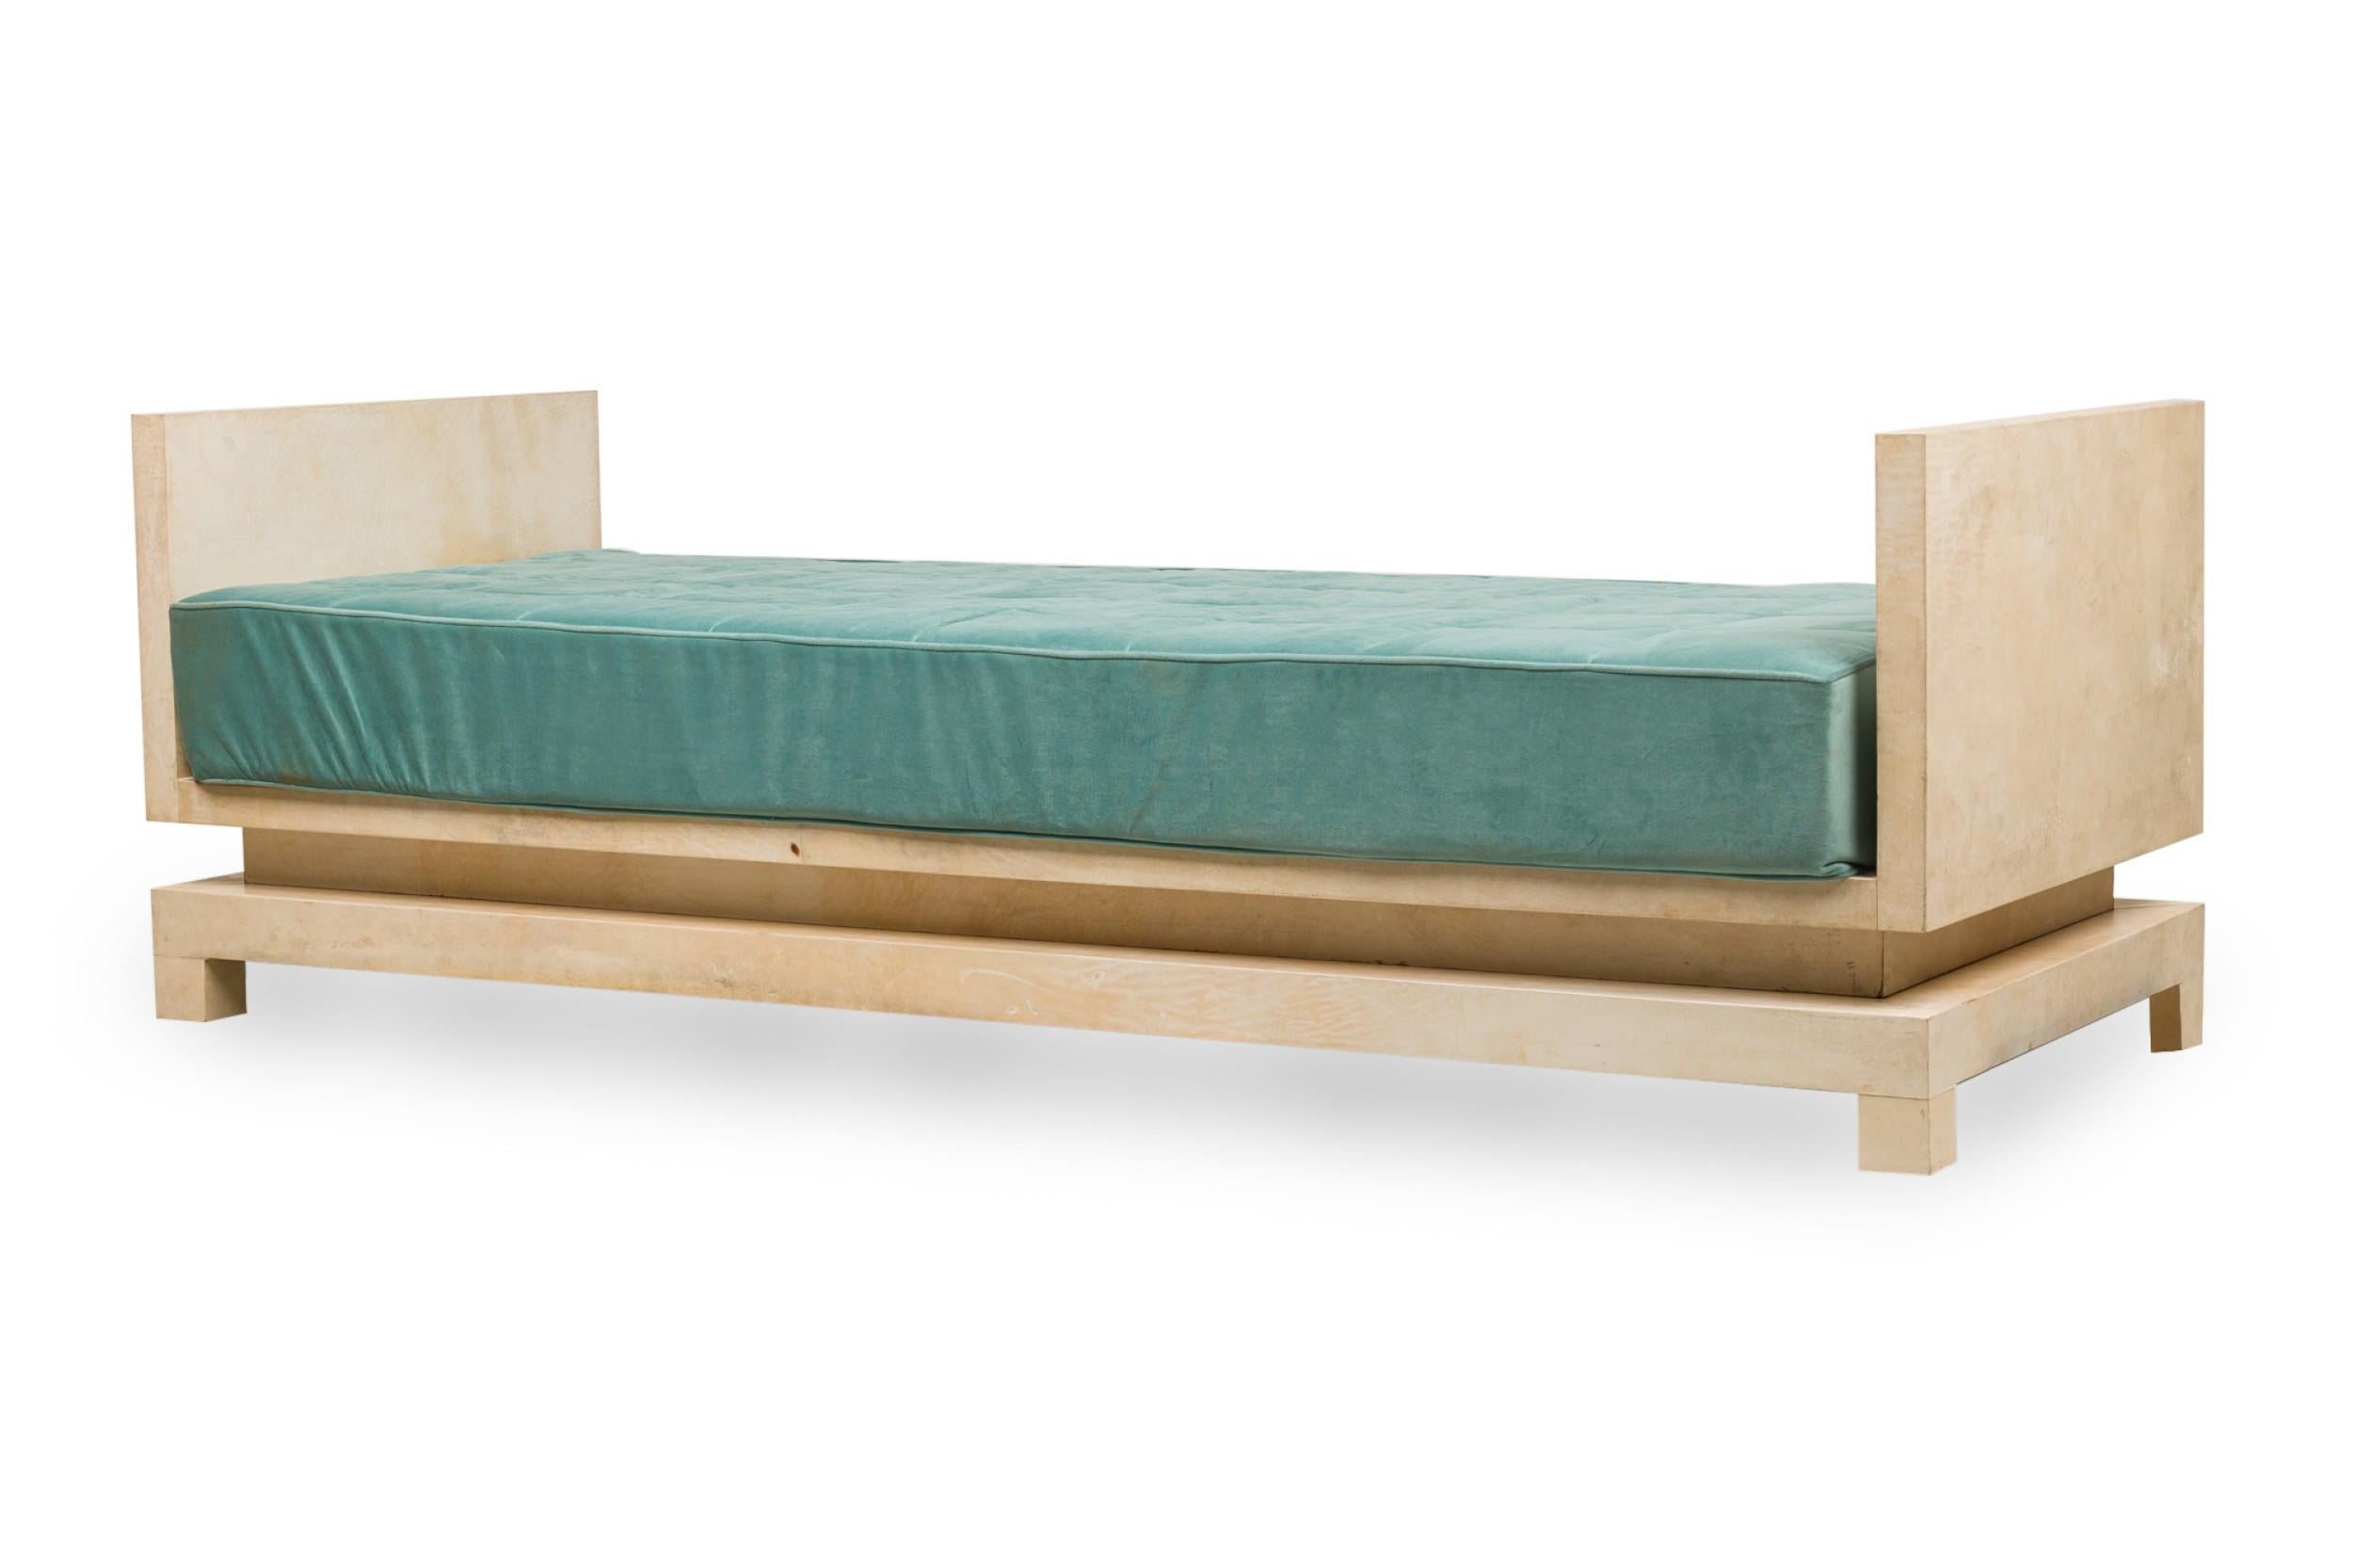 Mid-Century American parchment covered rectangular daybed in a modern geometric style on a raised platform with an upholstered, tufted seat cushion in a light turquoise fabric, resting on 4 block legs. (In the manner of SAMUEL MARX) (Companion